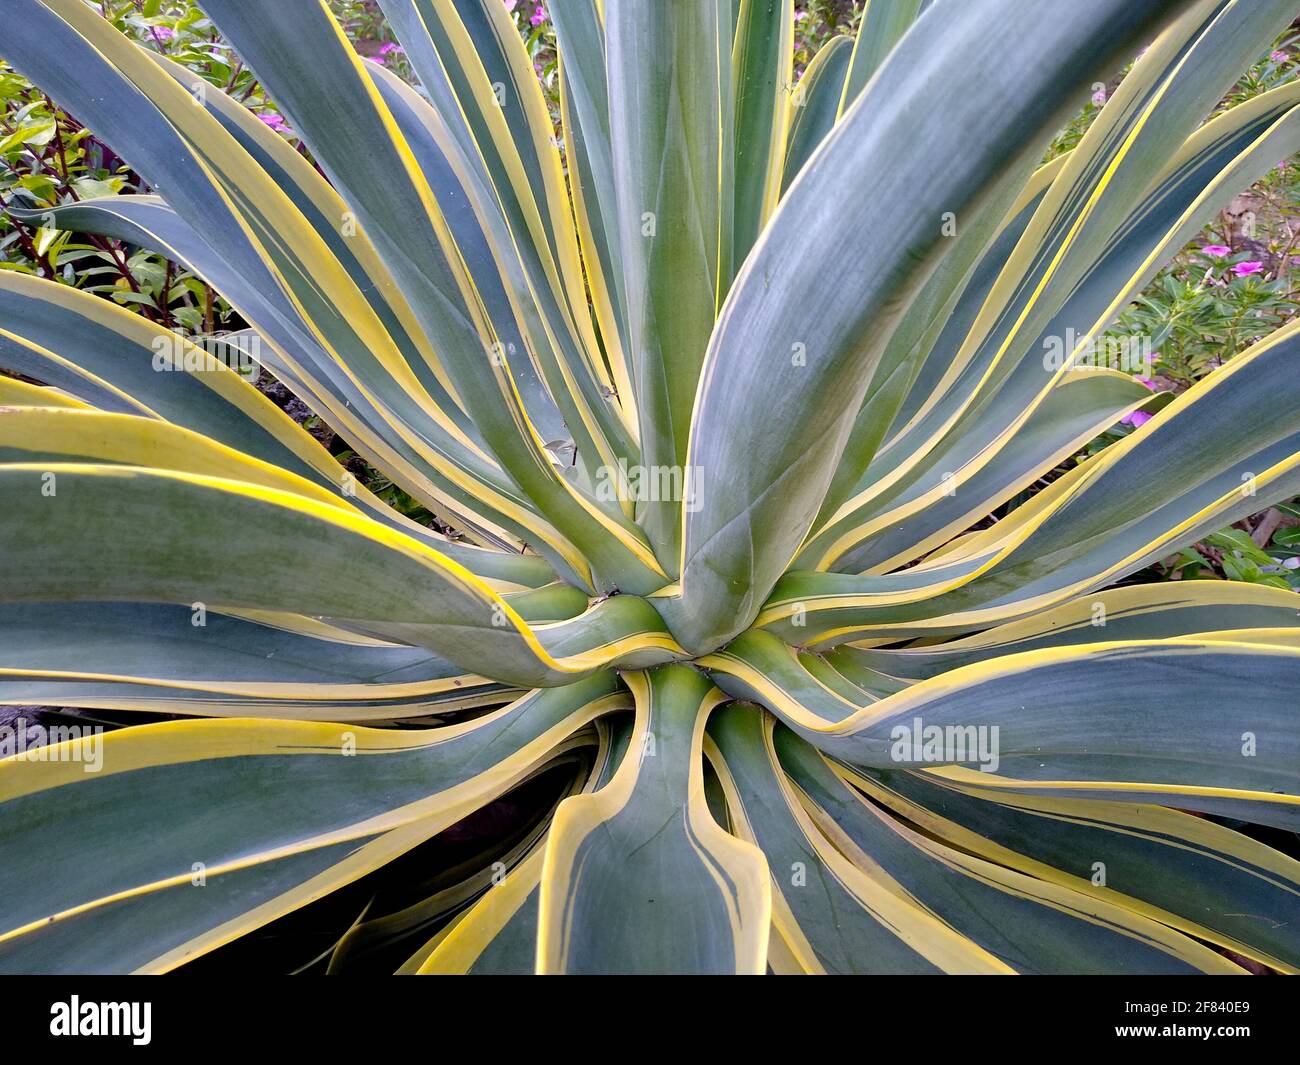 salvador, bahia / brazil - november 23, 2020: american agave plant is seen in the garden of a residence in the city of Salvador. Stock Photo